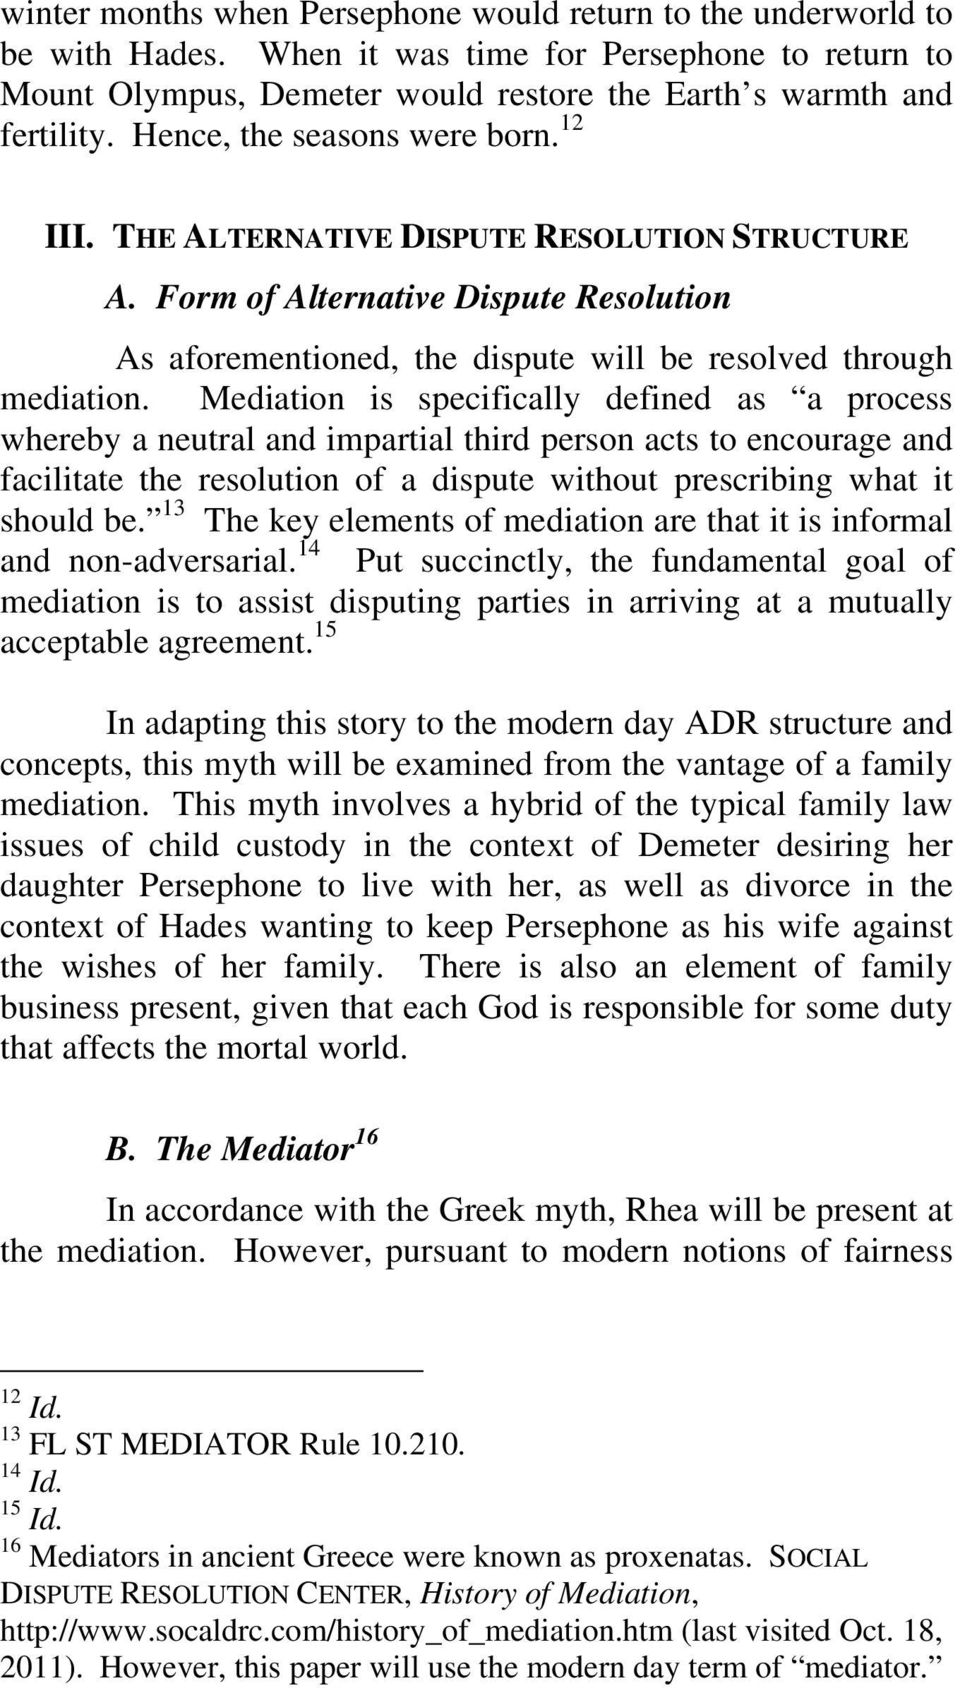 Mediation is specifically defined as a process whereby a neutral and impartial third person acts to encourage and facilitate the resolution of a dispute without prescribing what it should be.